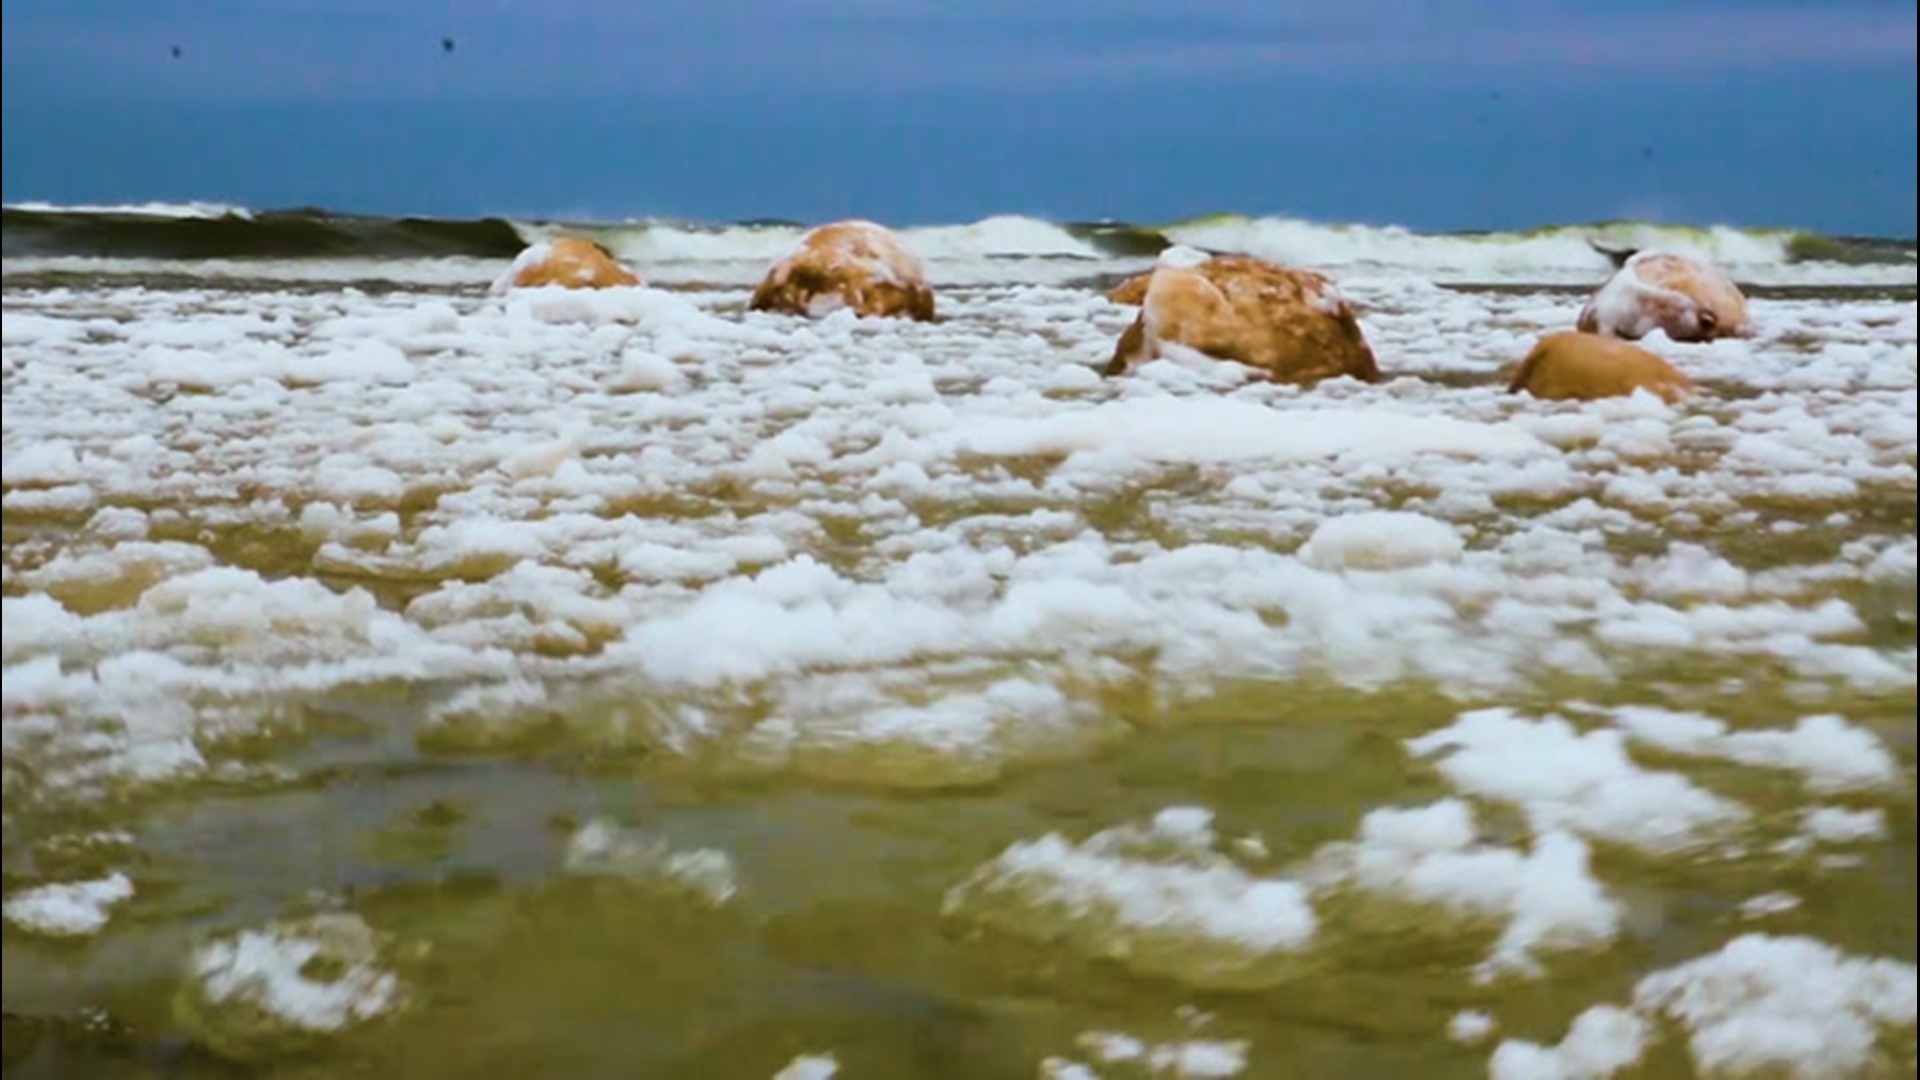 A unique phenomenon occurred on the shoreline of Lake Michigan in Holland, Michigan, on Feb. 15, as large ice balls washed ashore.